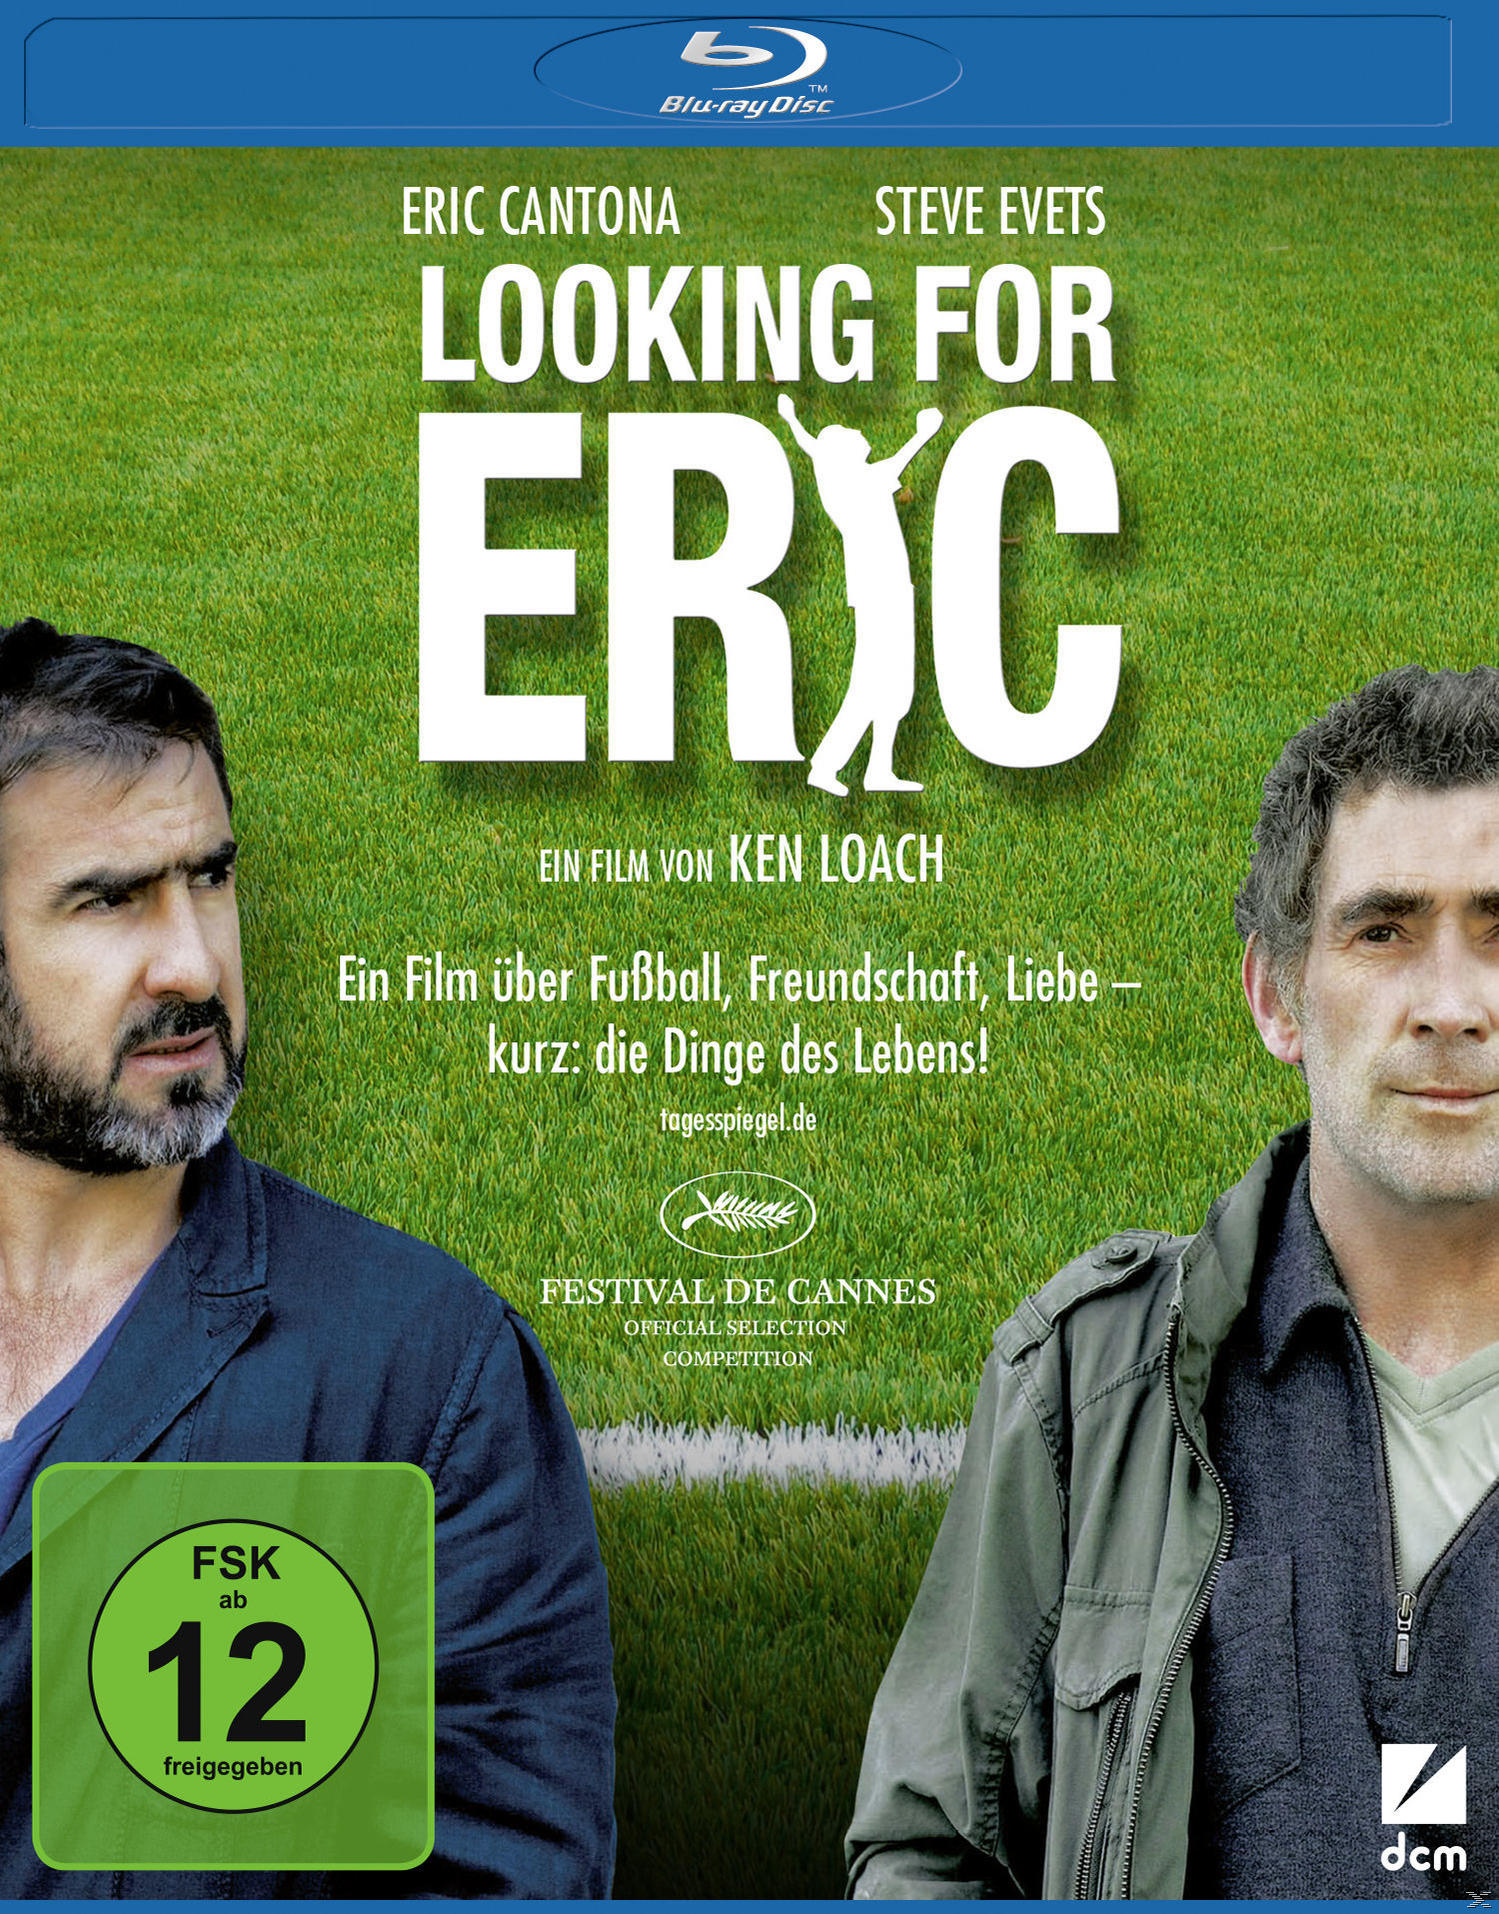 Eric Blu-ray for Looking